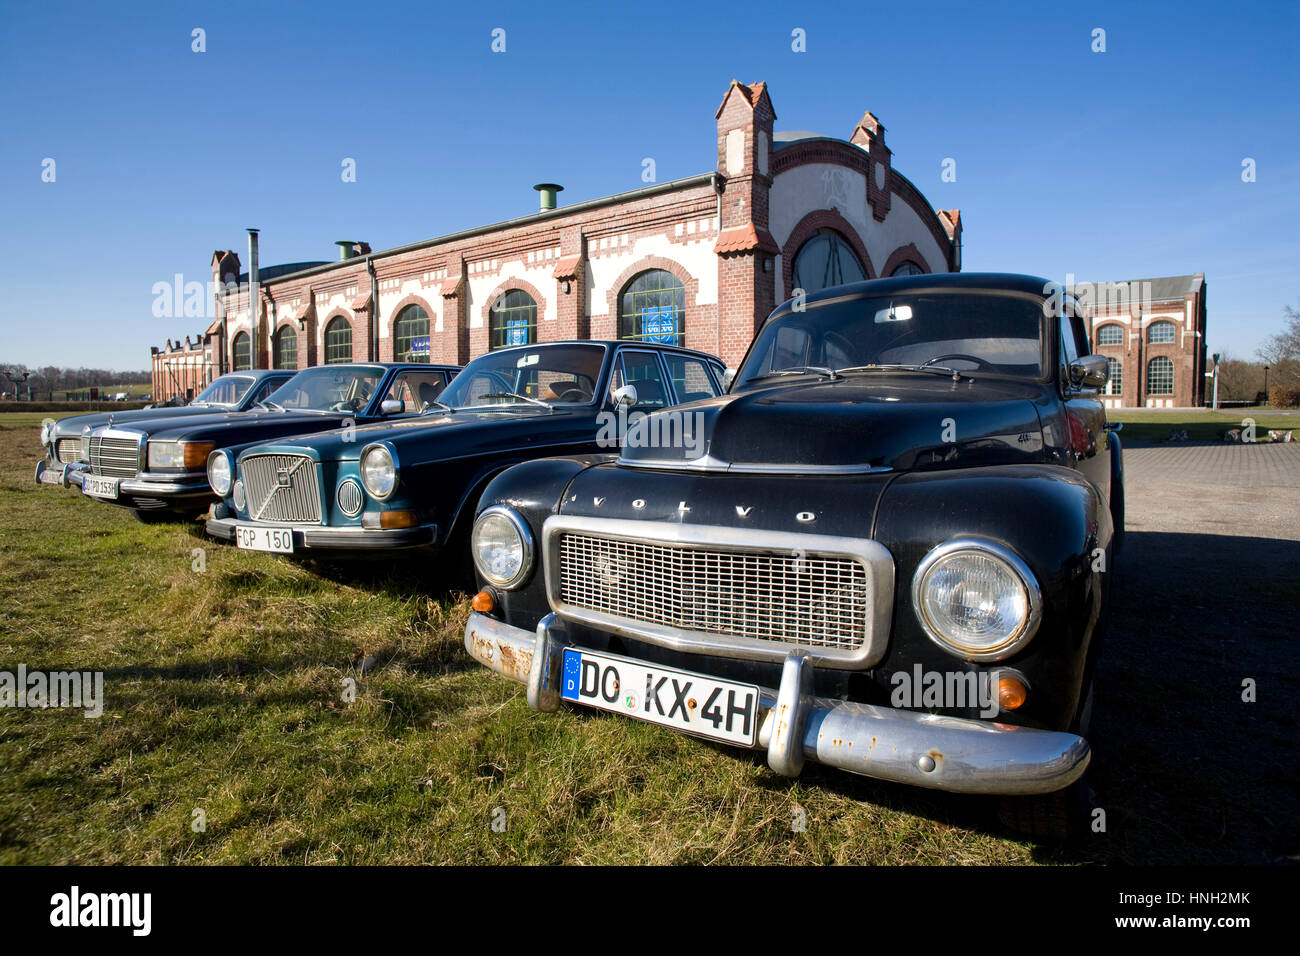 Germany, Waltrop, old Volvo PV 544 car in front of a building of the former coal-mine Waltrop Stock Photo